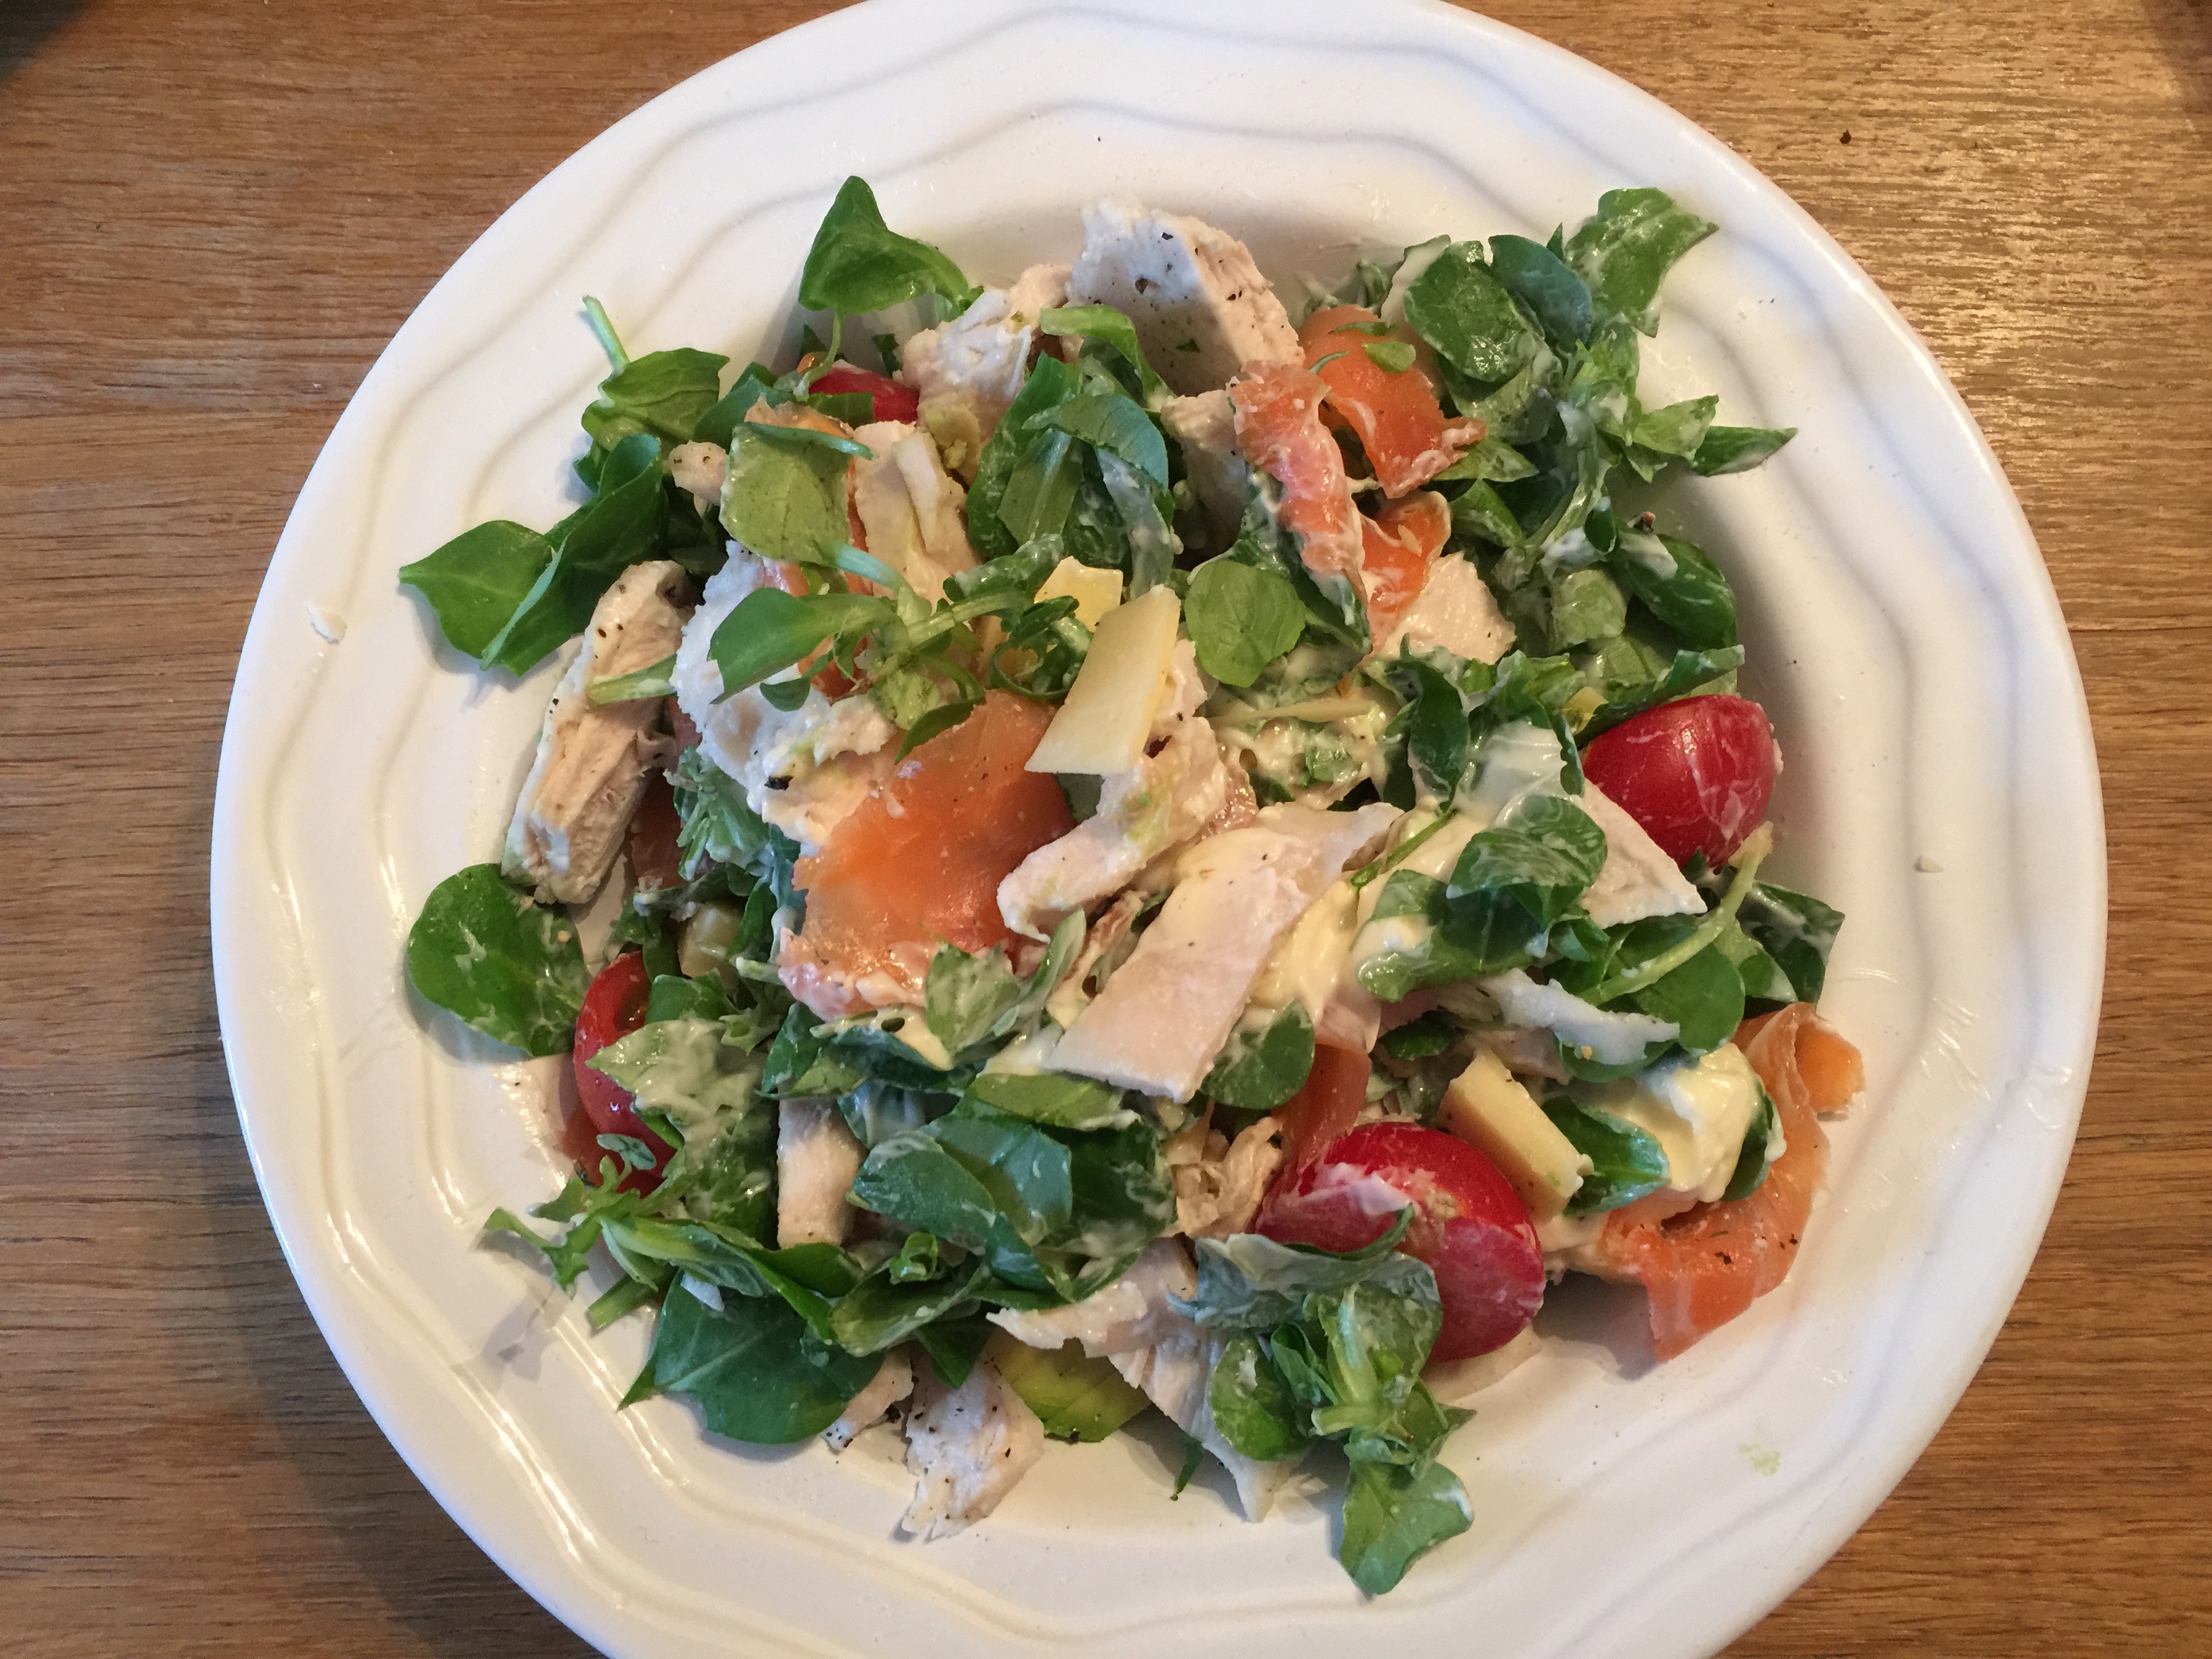 Chicken, salmon, cheese and avocado salad - Low Carb Hero